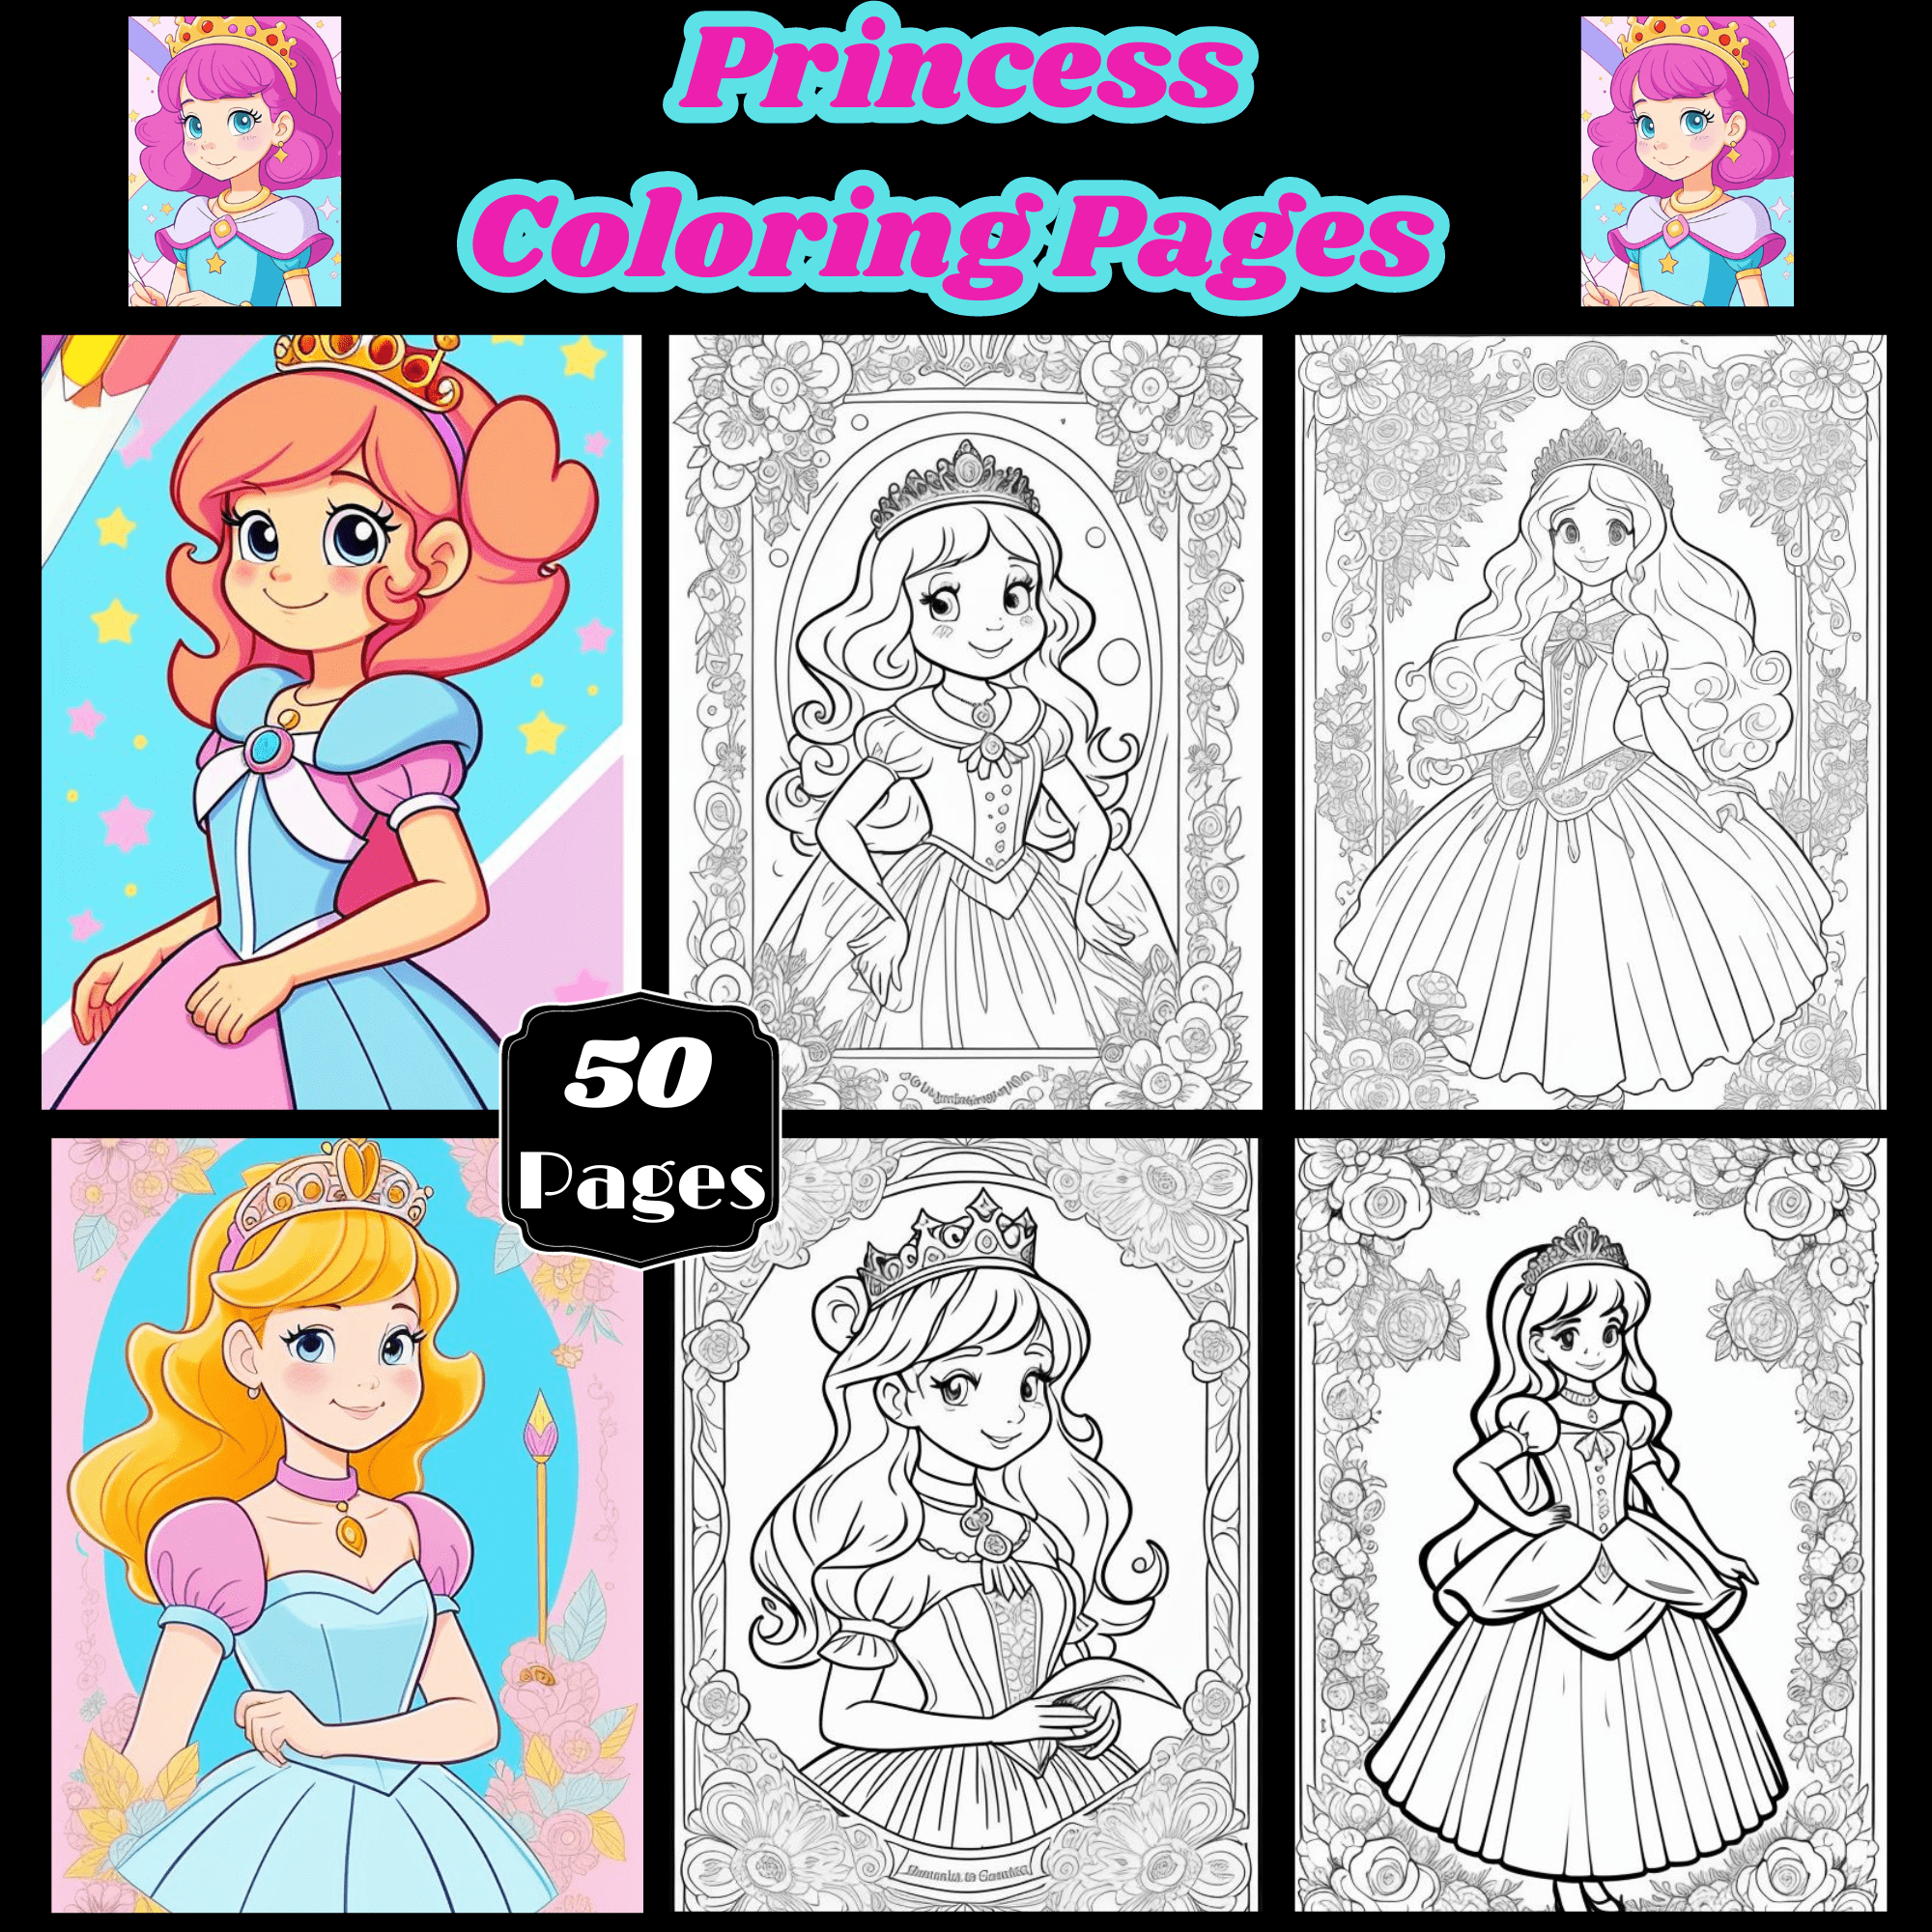 Princess coloring pages for kids and adults